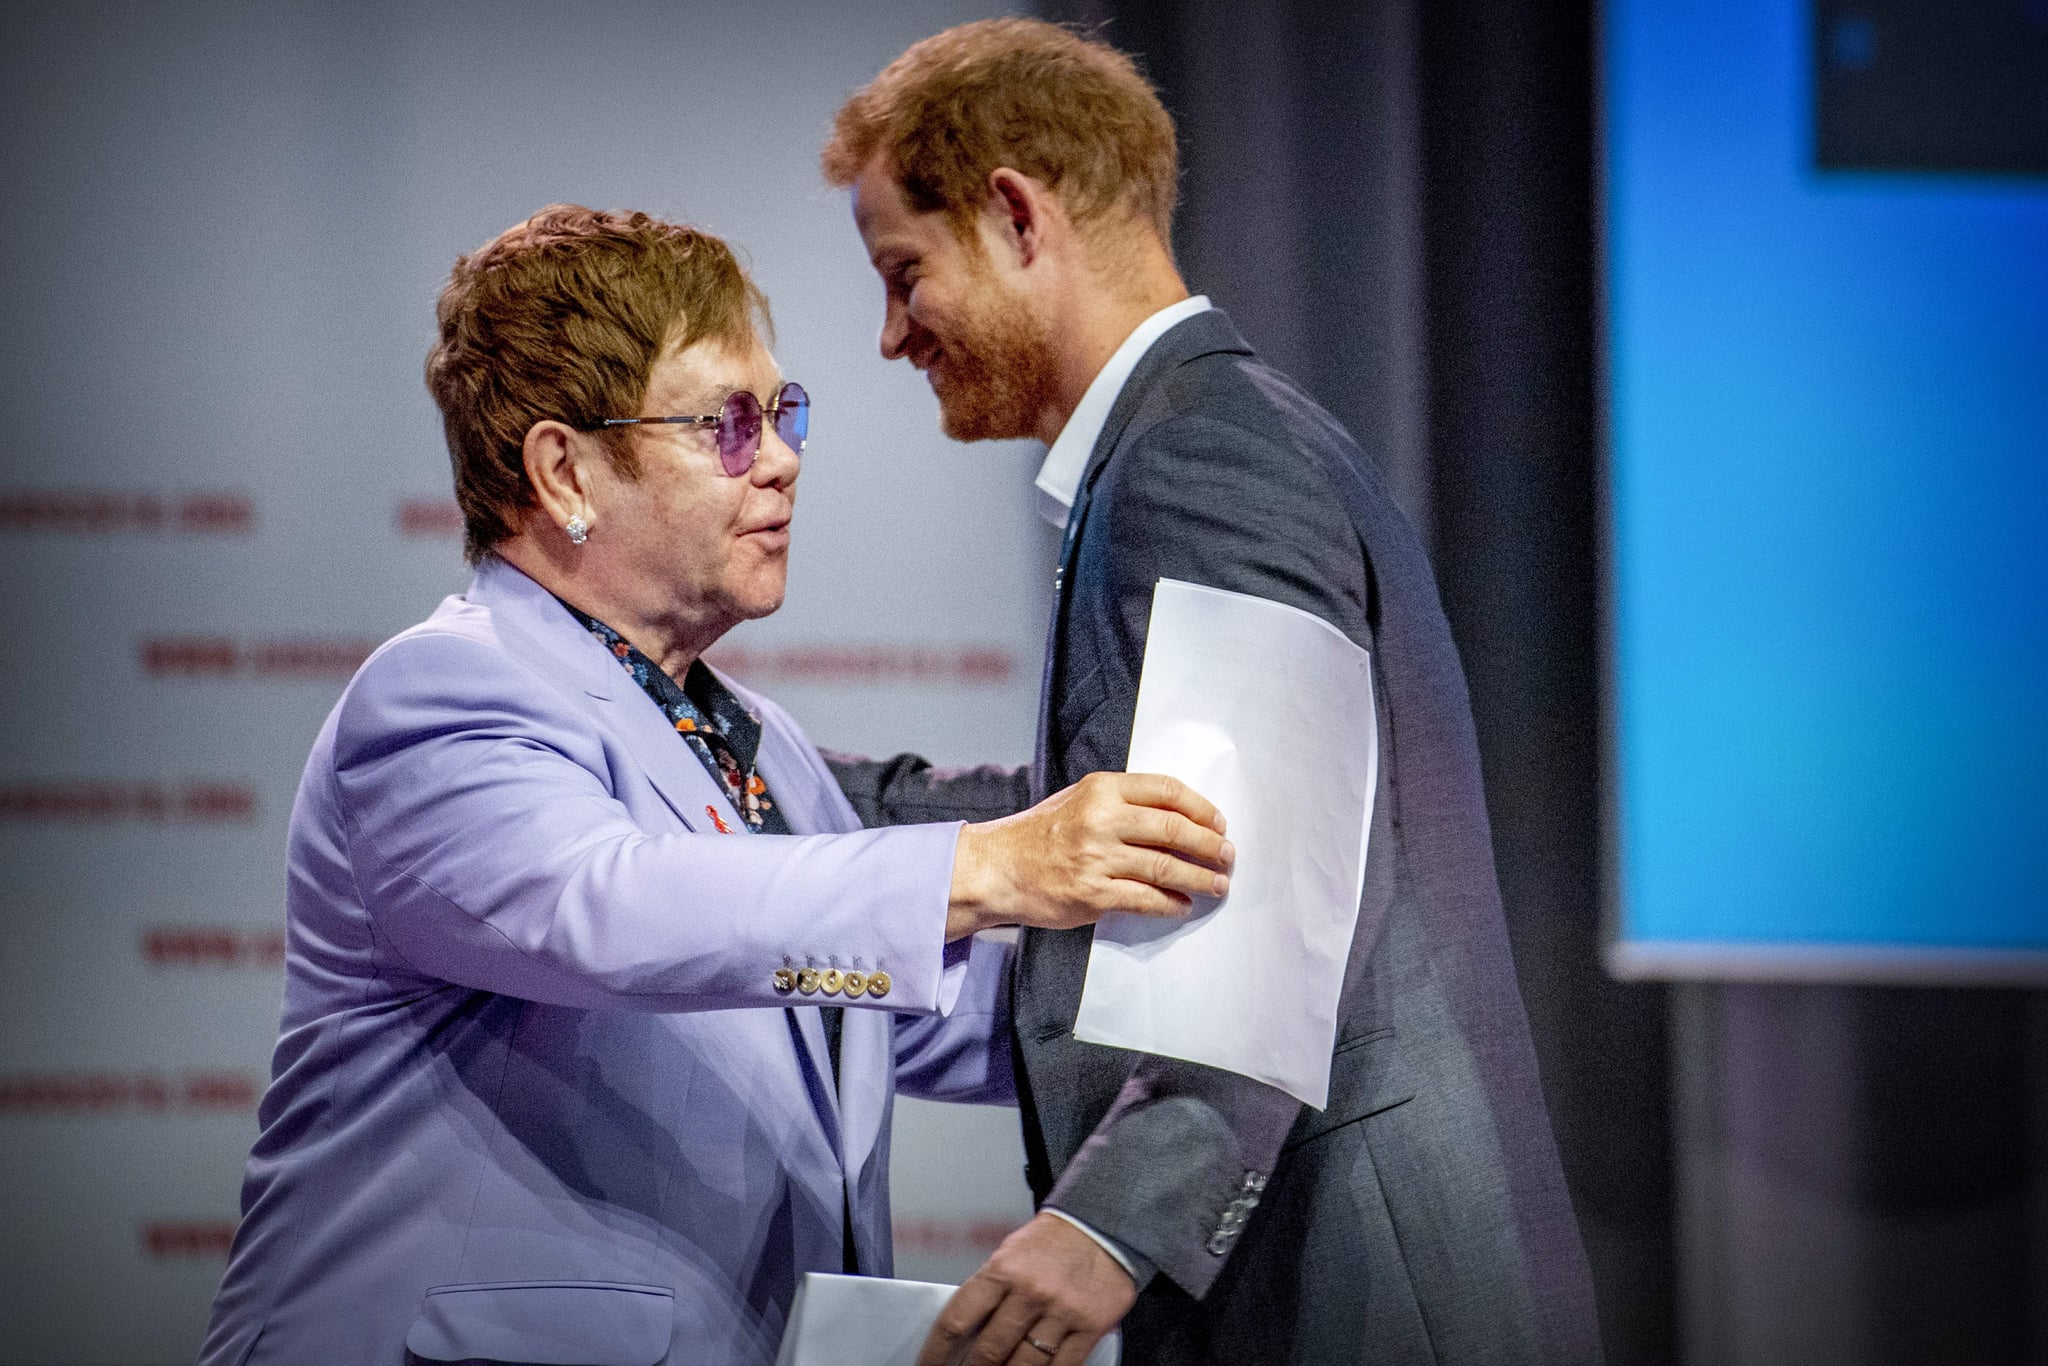 British Prince Harry (L) and sir Elton John attend a session about the Elton John Aids Fund on the second day of the Aids2018 conference, in Amsterdam on July 24, 2018. - From 23 to July 27, thousands of delegates -- researchers, campaigners, activists and people living with the killer virus -- attend the 22nd International AIDS Conference amid warnings that